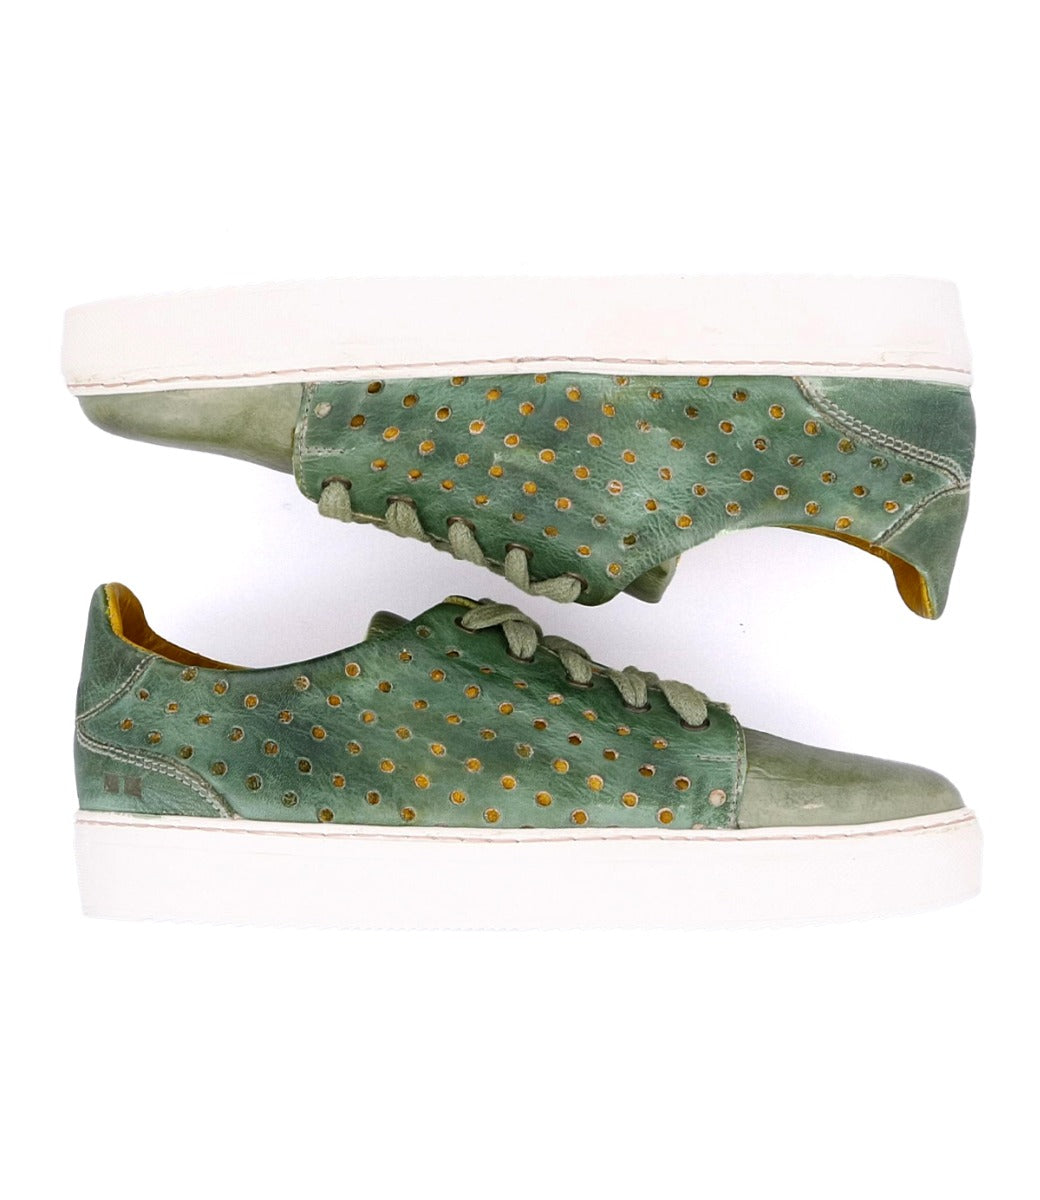 A pair of green Lyne sneakers with yellow dots from Bed Stu.